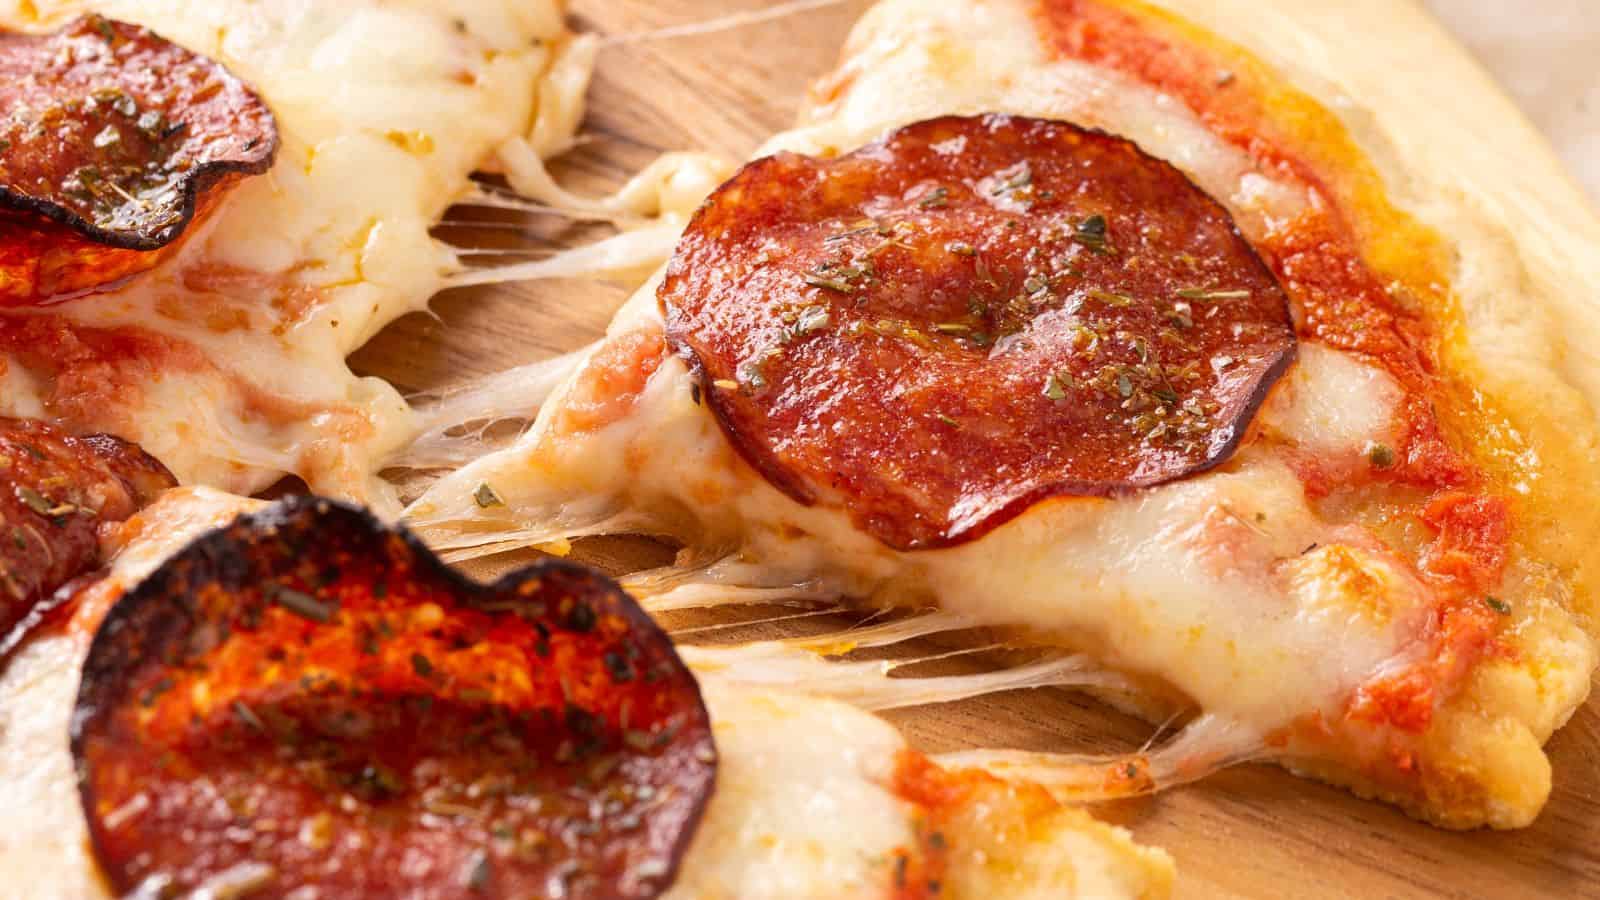 Close-up of a pepperoni pizza slice being lifted, showing melted cheese and tomato sauce.